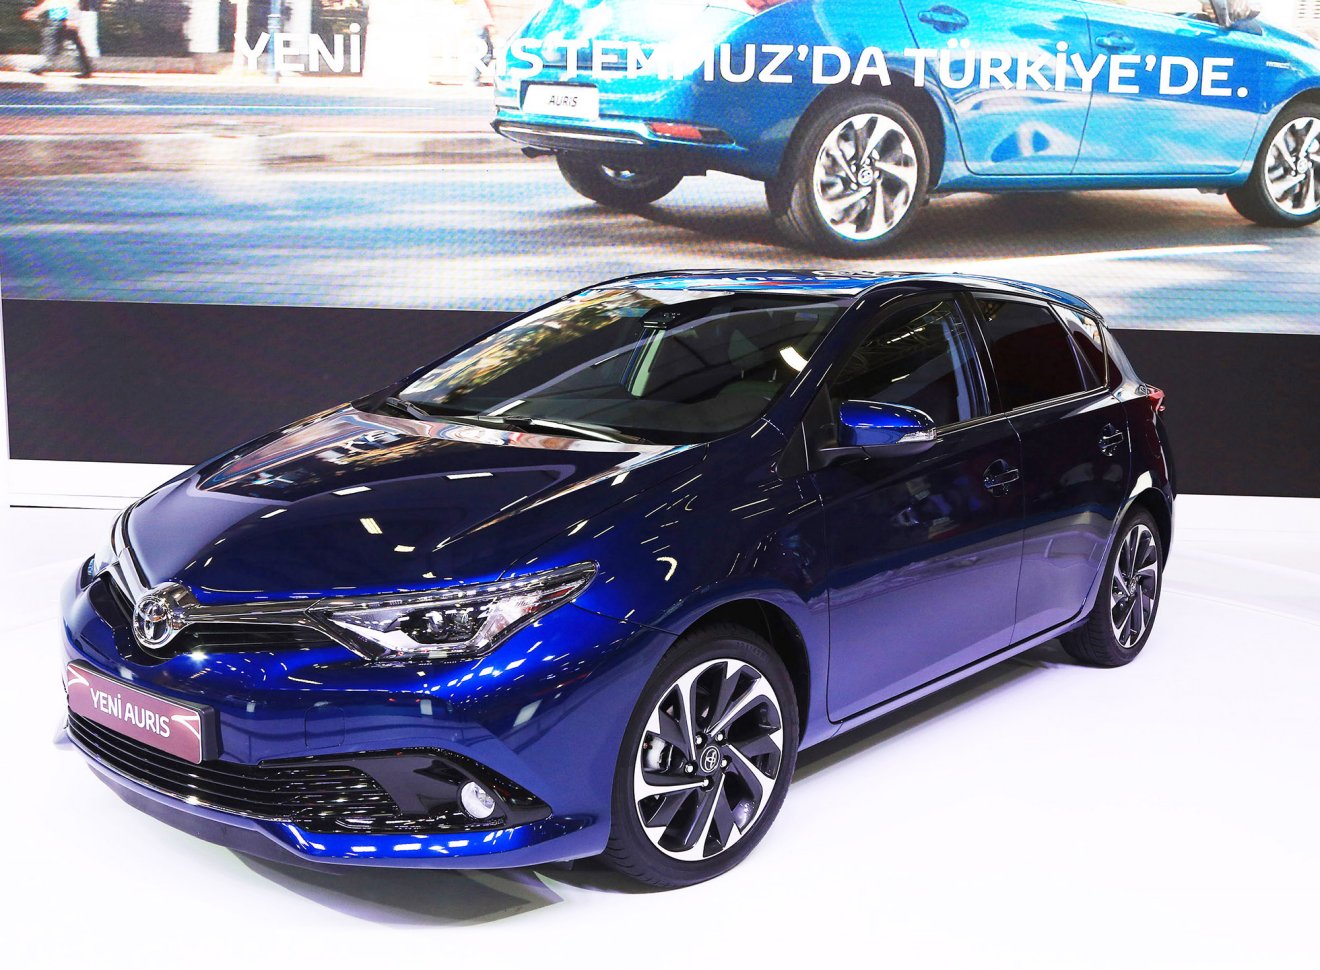 TOYOTA STANBUL AUTOSHOW 2015 RESM GALERS